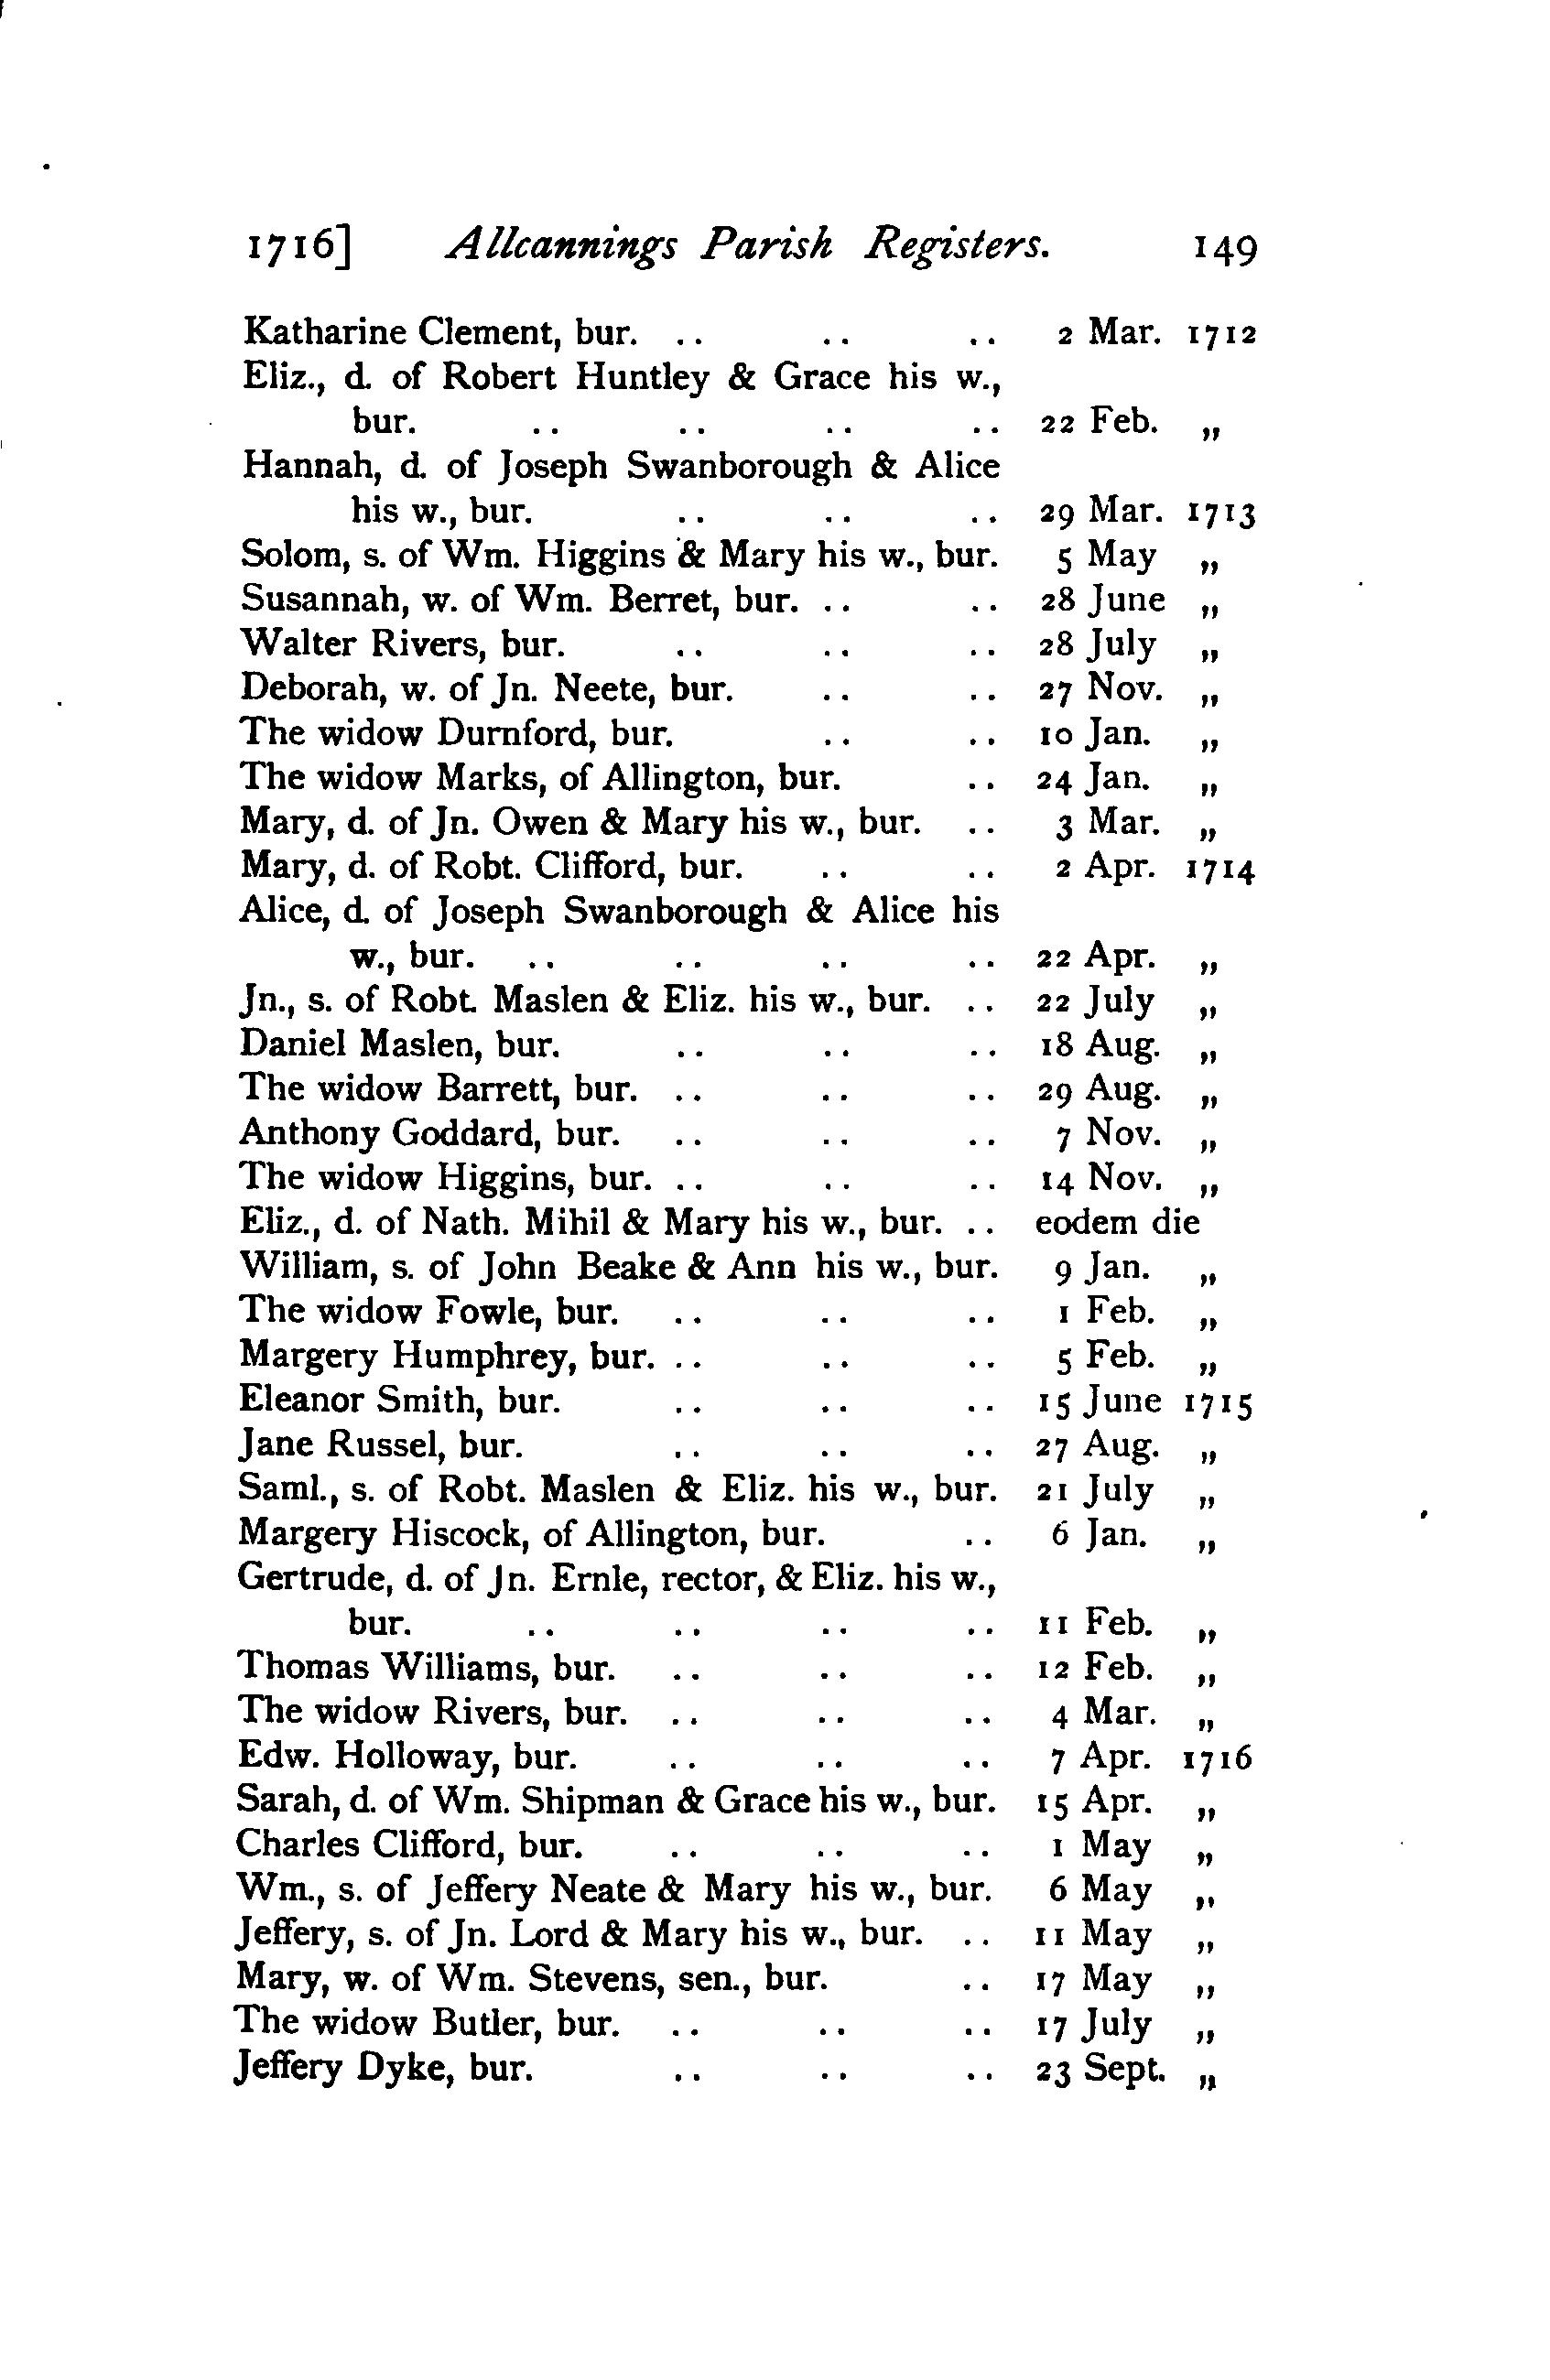 1905 Transcript of All Cannings parish registers showing deaths of Alice and Hannah Swanborough in 1712 and 1714